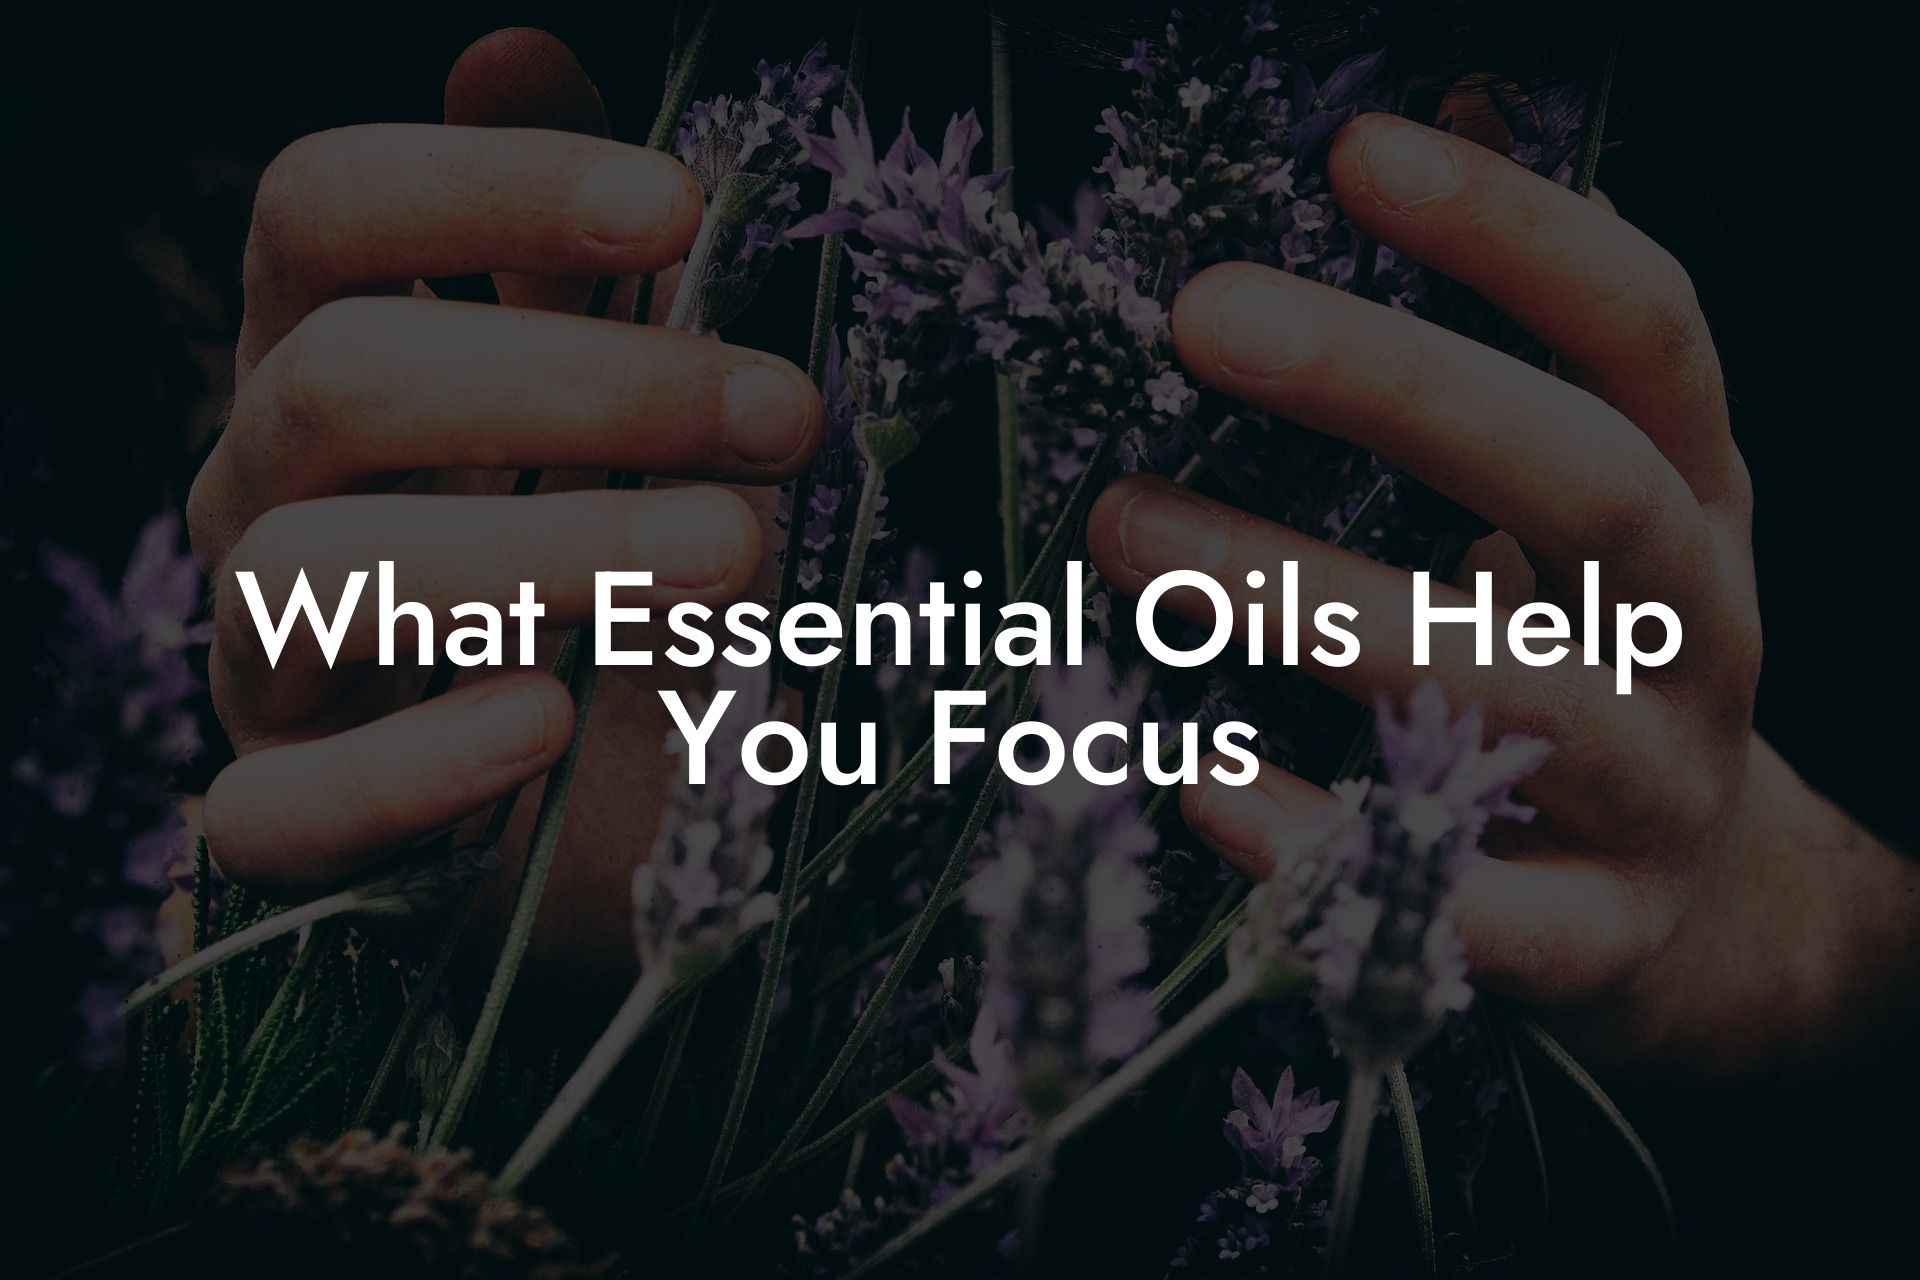 What Essential Oils Help You Focus